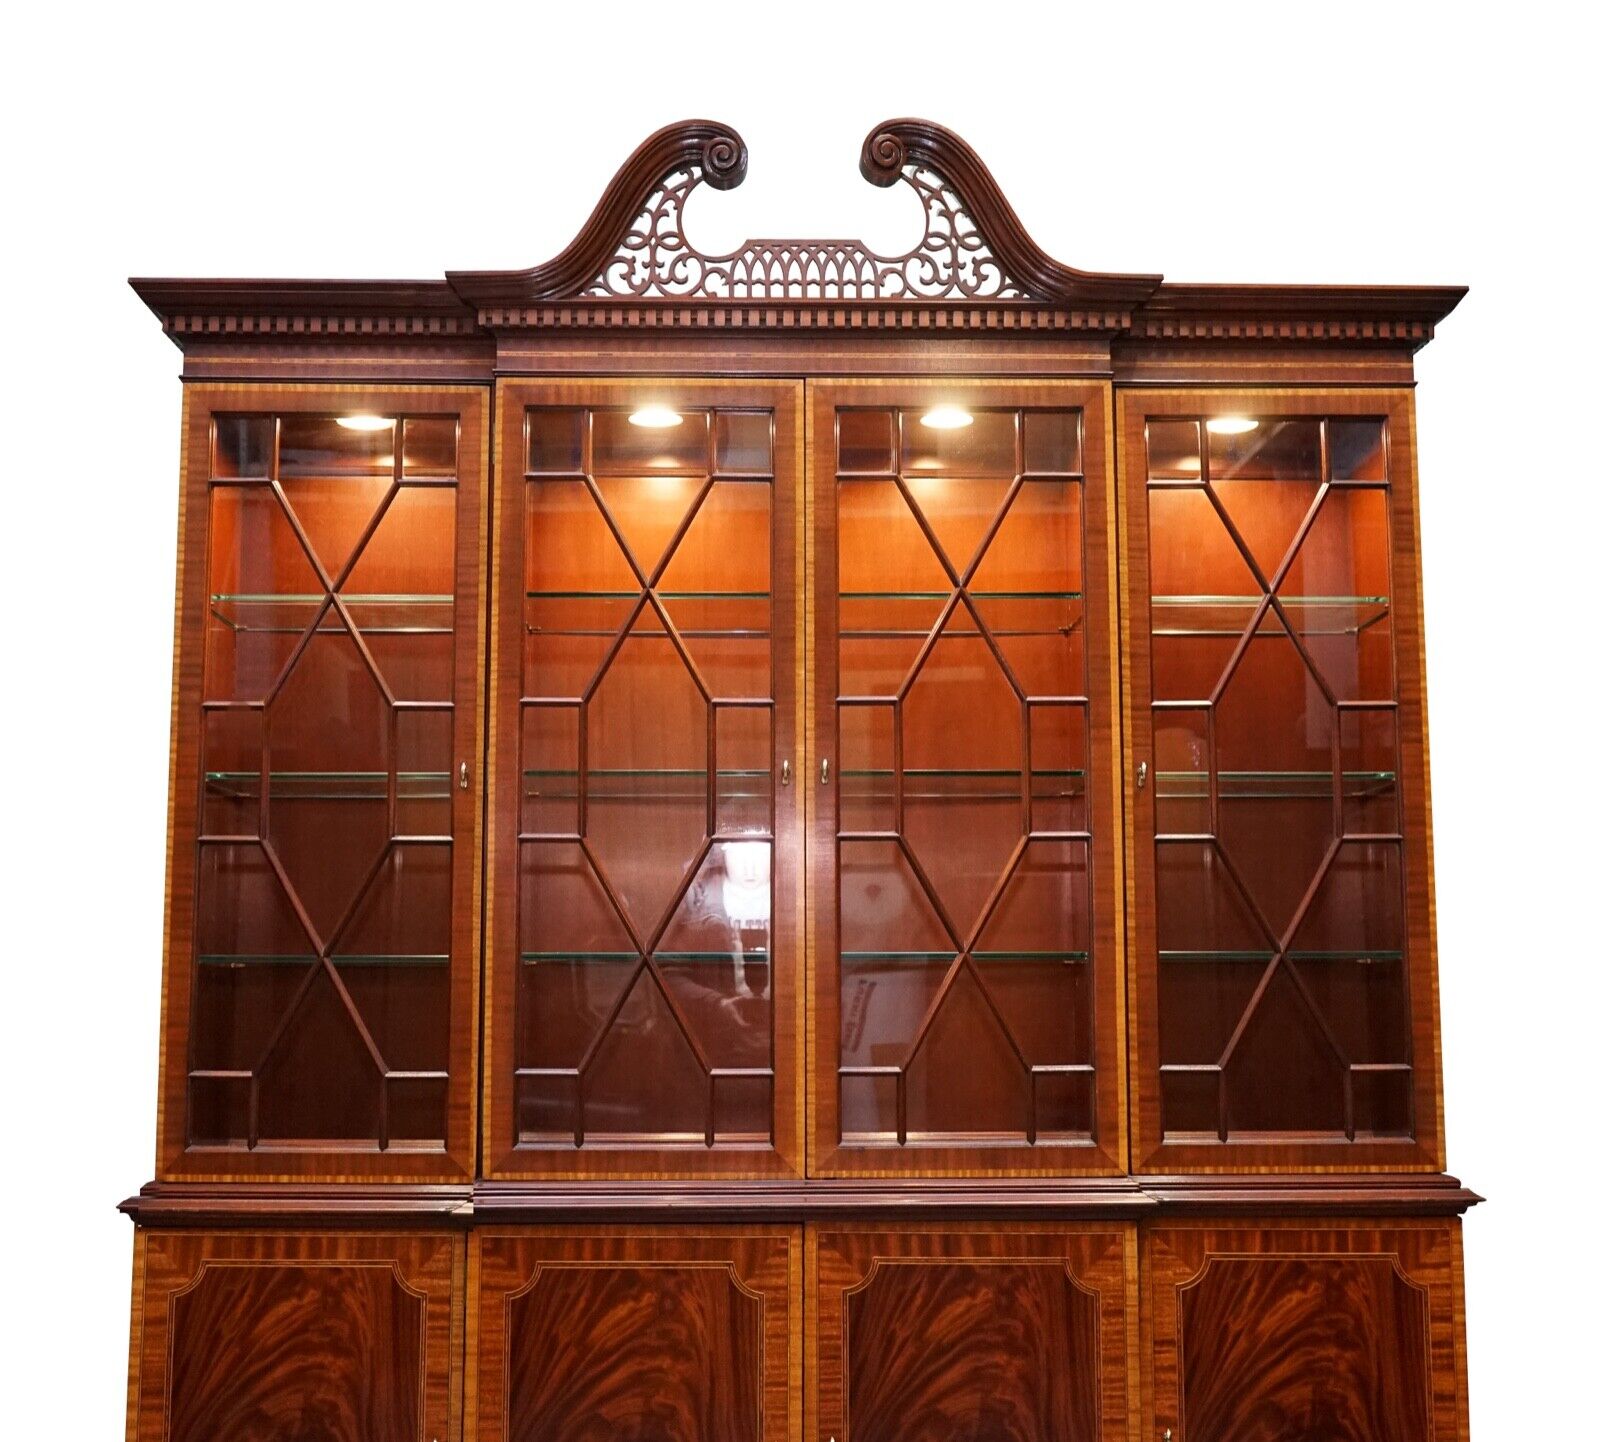 LARGE GEORGIAN STYLE MAHOGANY BREAKFRONT BOOKCASE COUNCILL FURNITURE